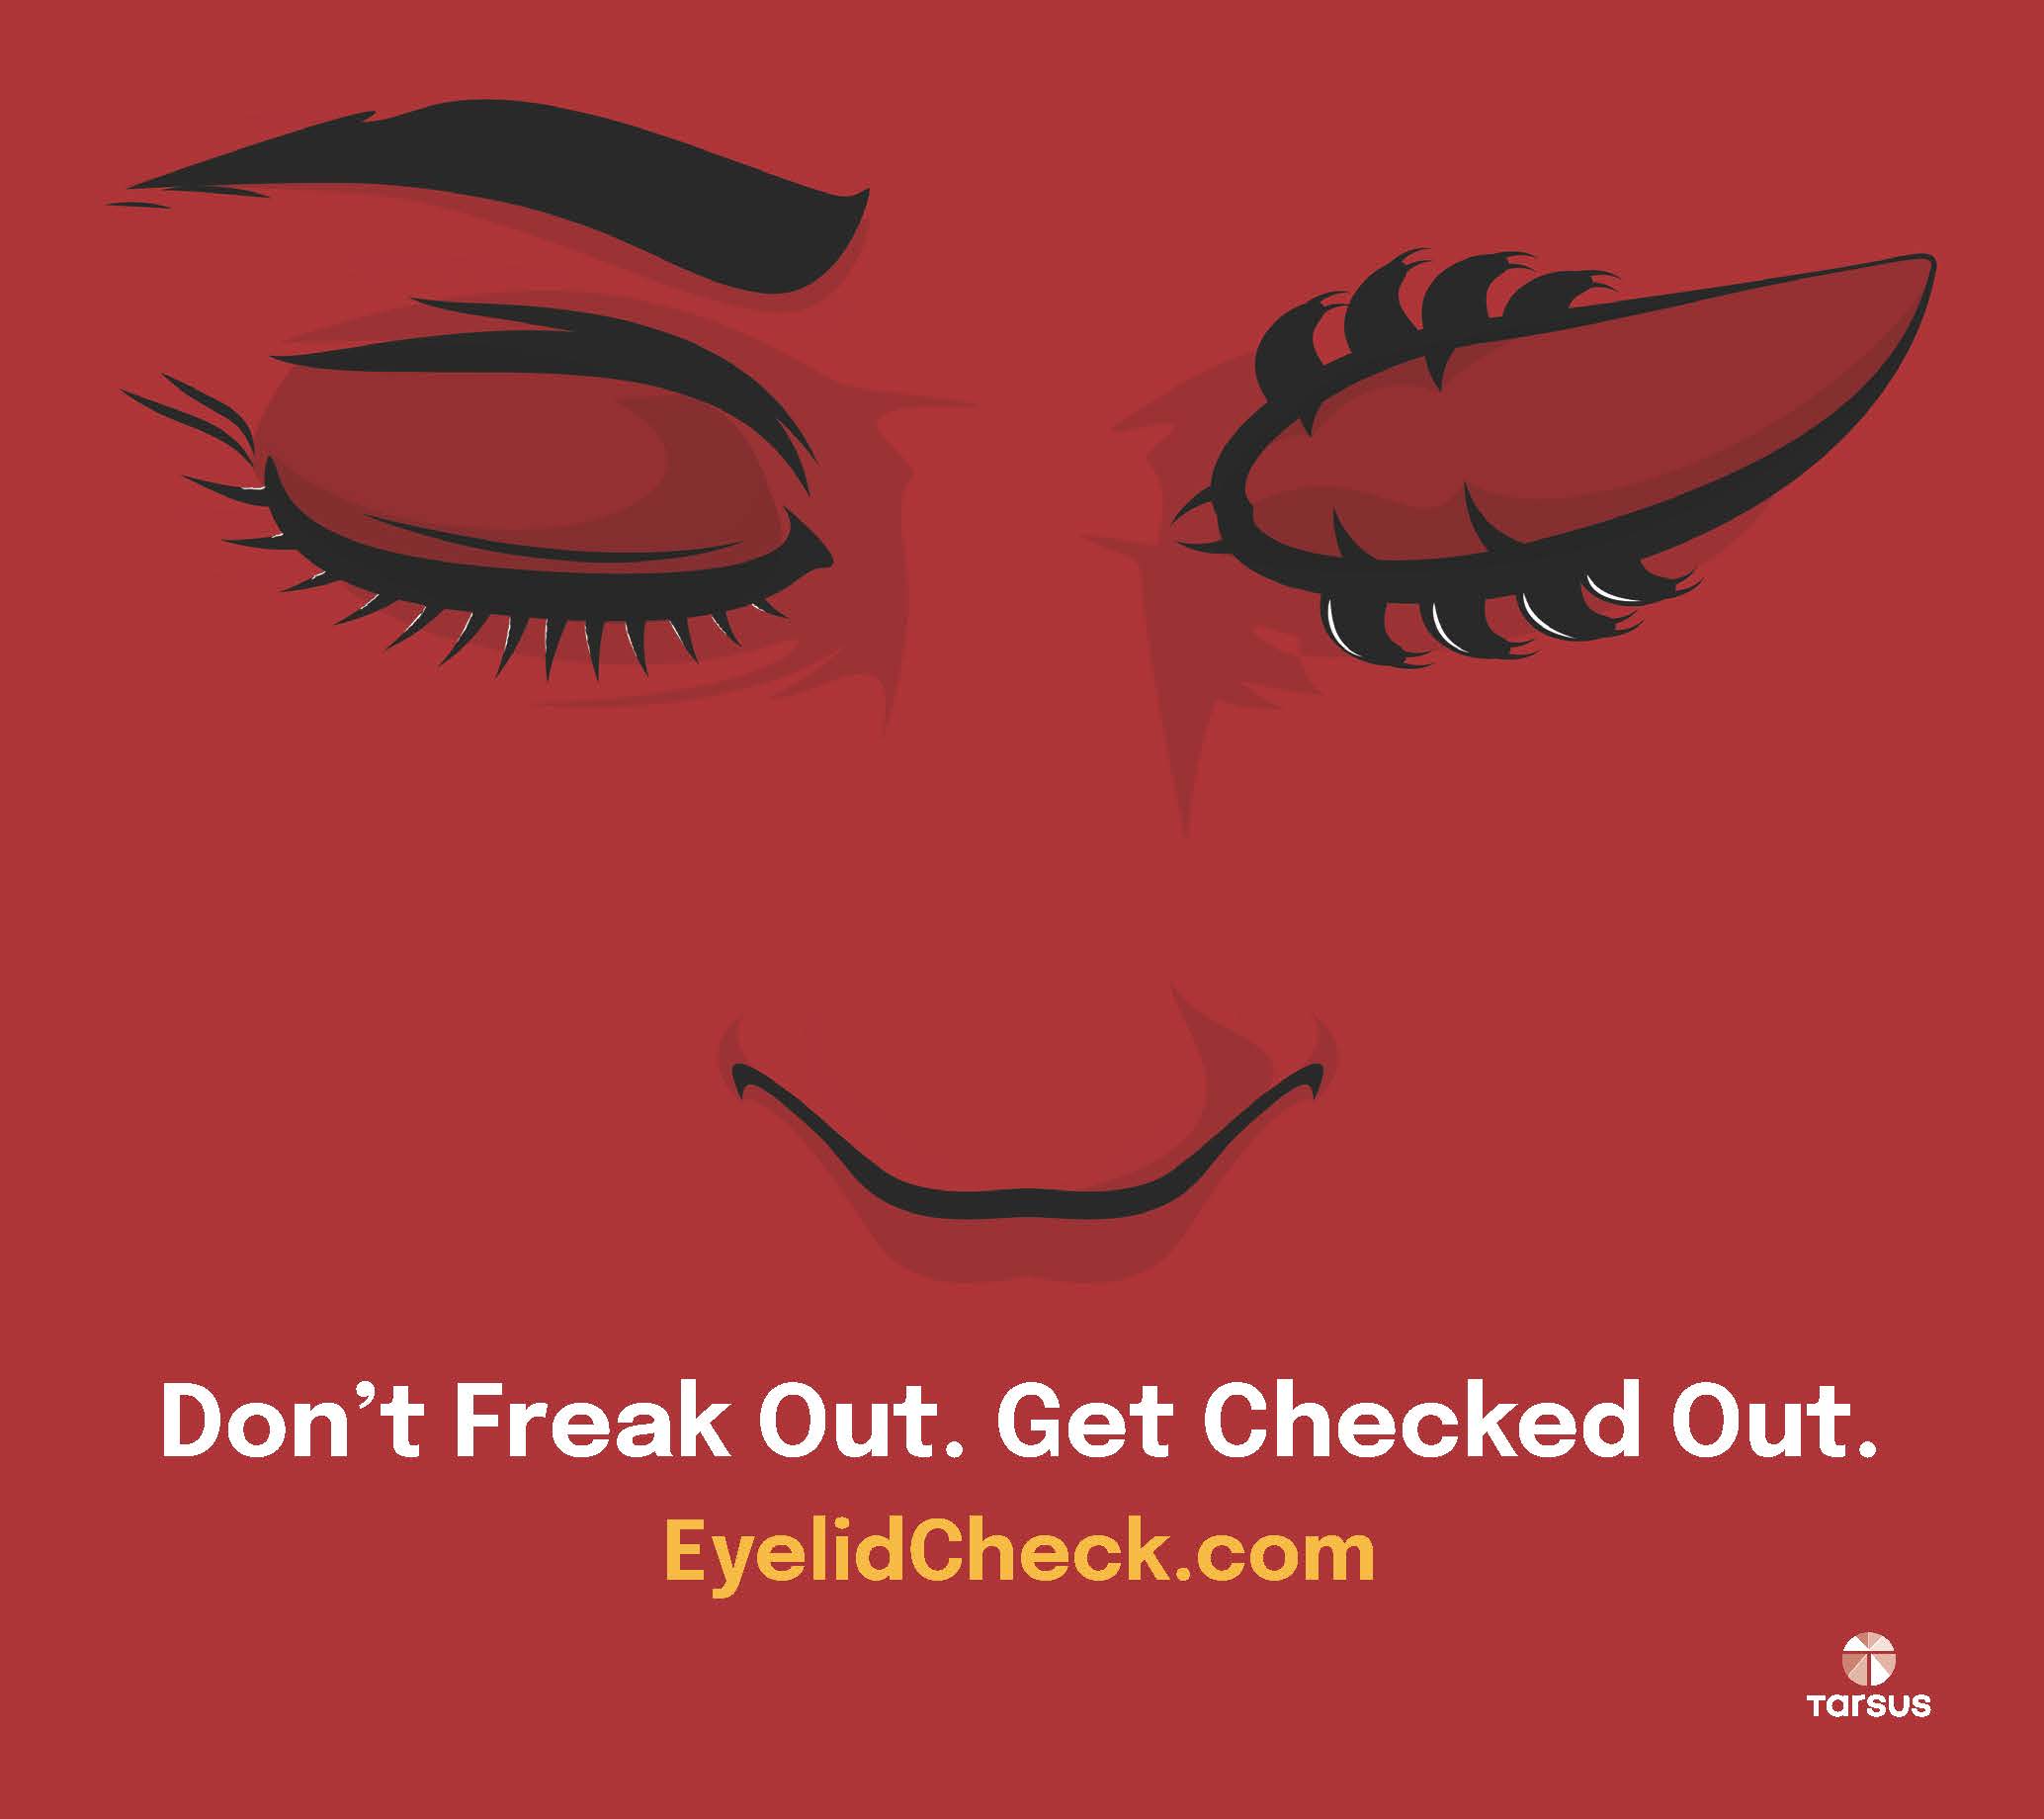 Tarsus Launches “Don’t Freak Out. Get Checked Out.” Campaign